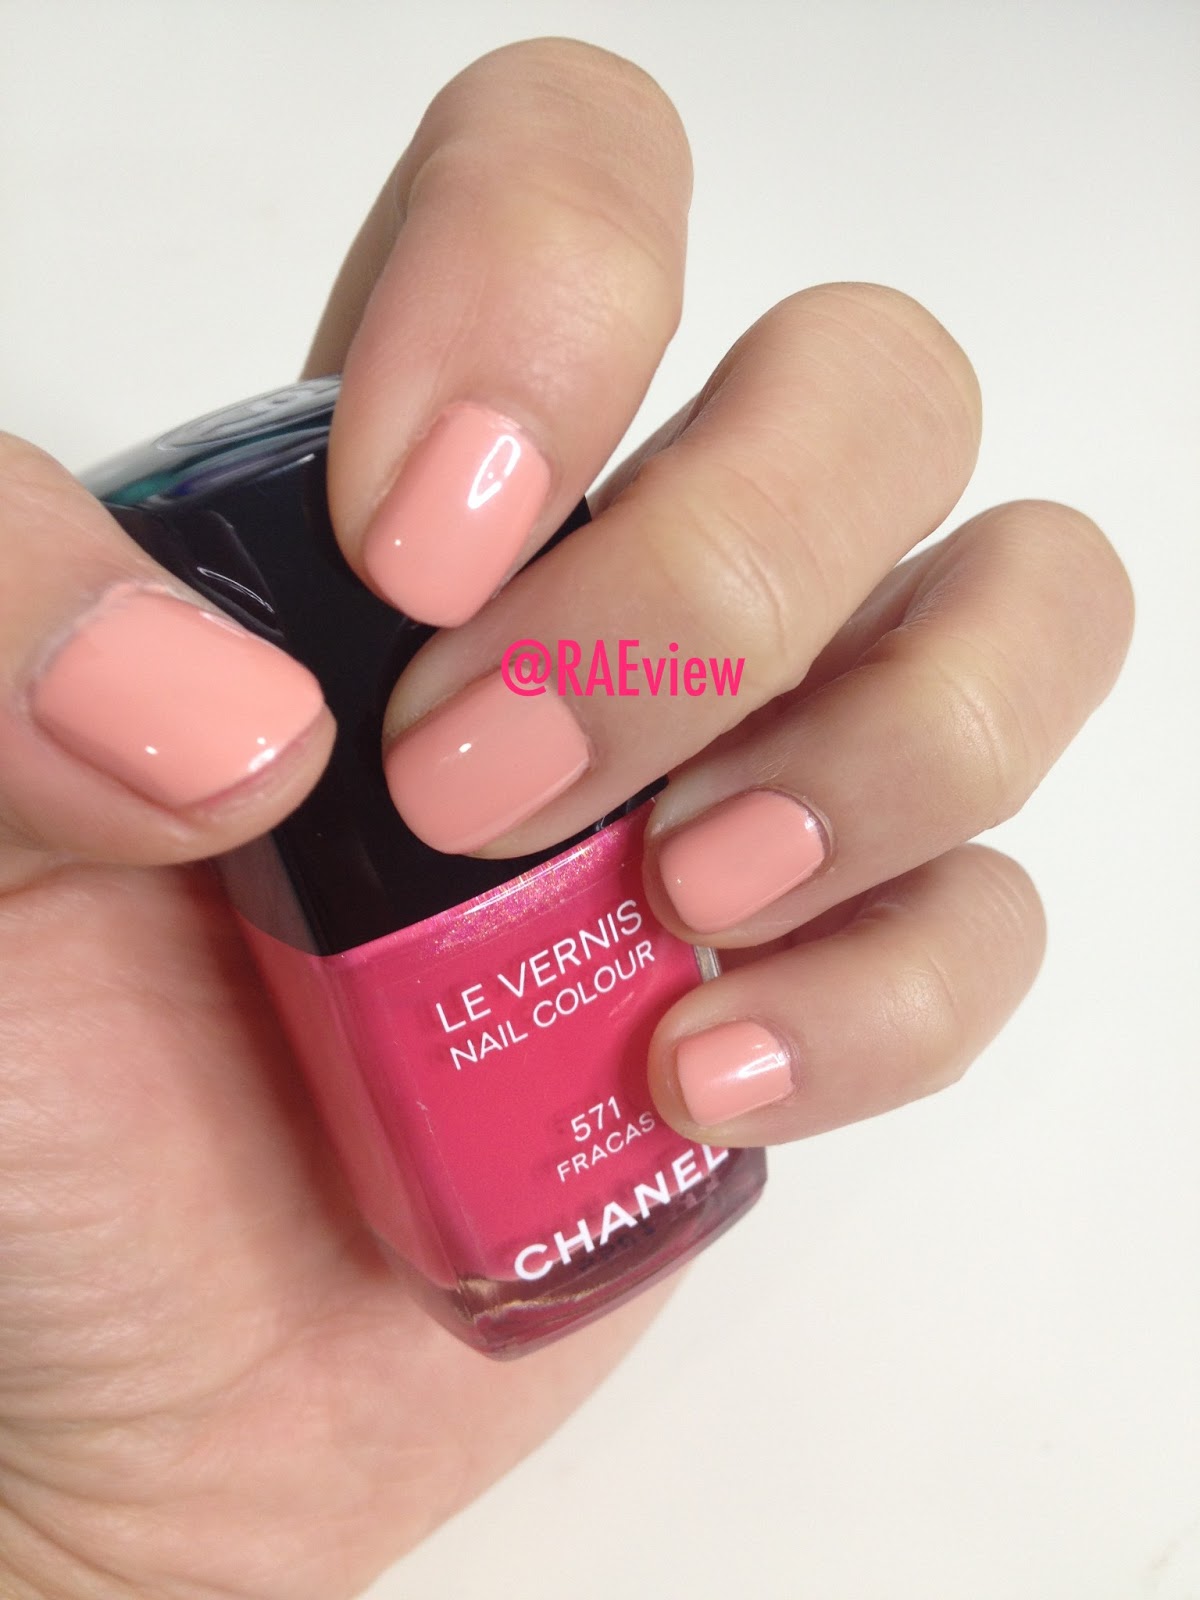 Treat Yo' Self - Chanel Taboo Le Vernis Swatch & Comparisons : All  Lacquered Up